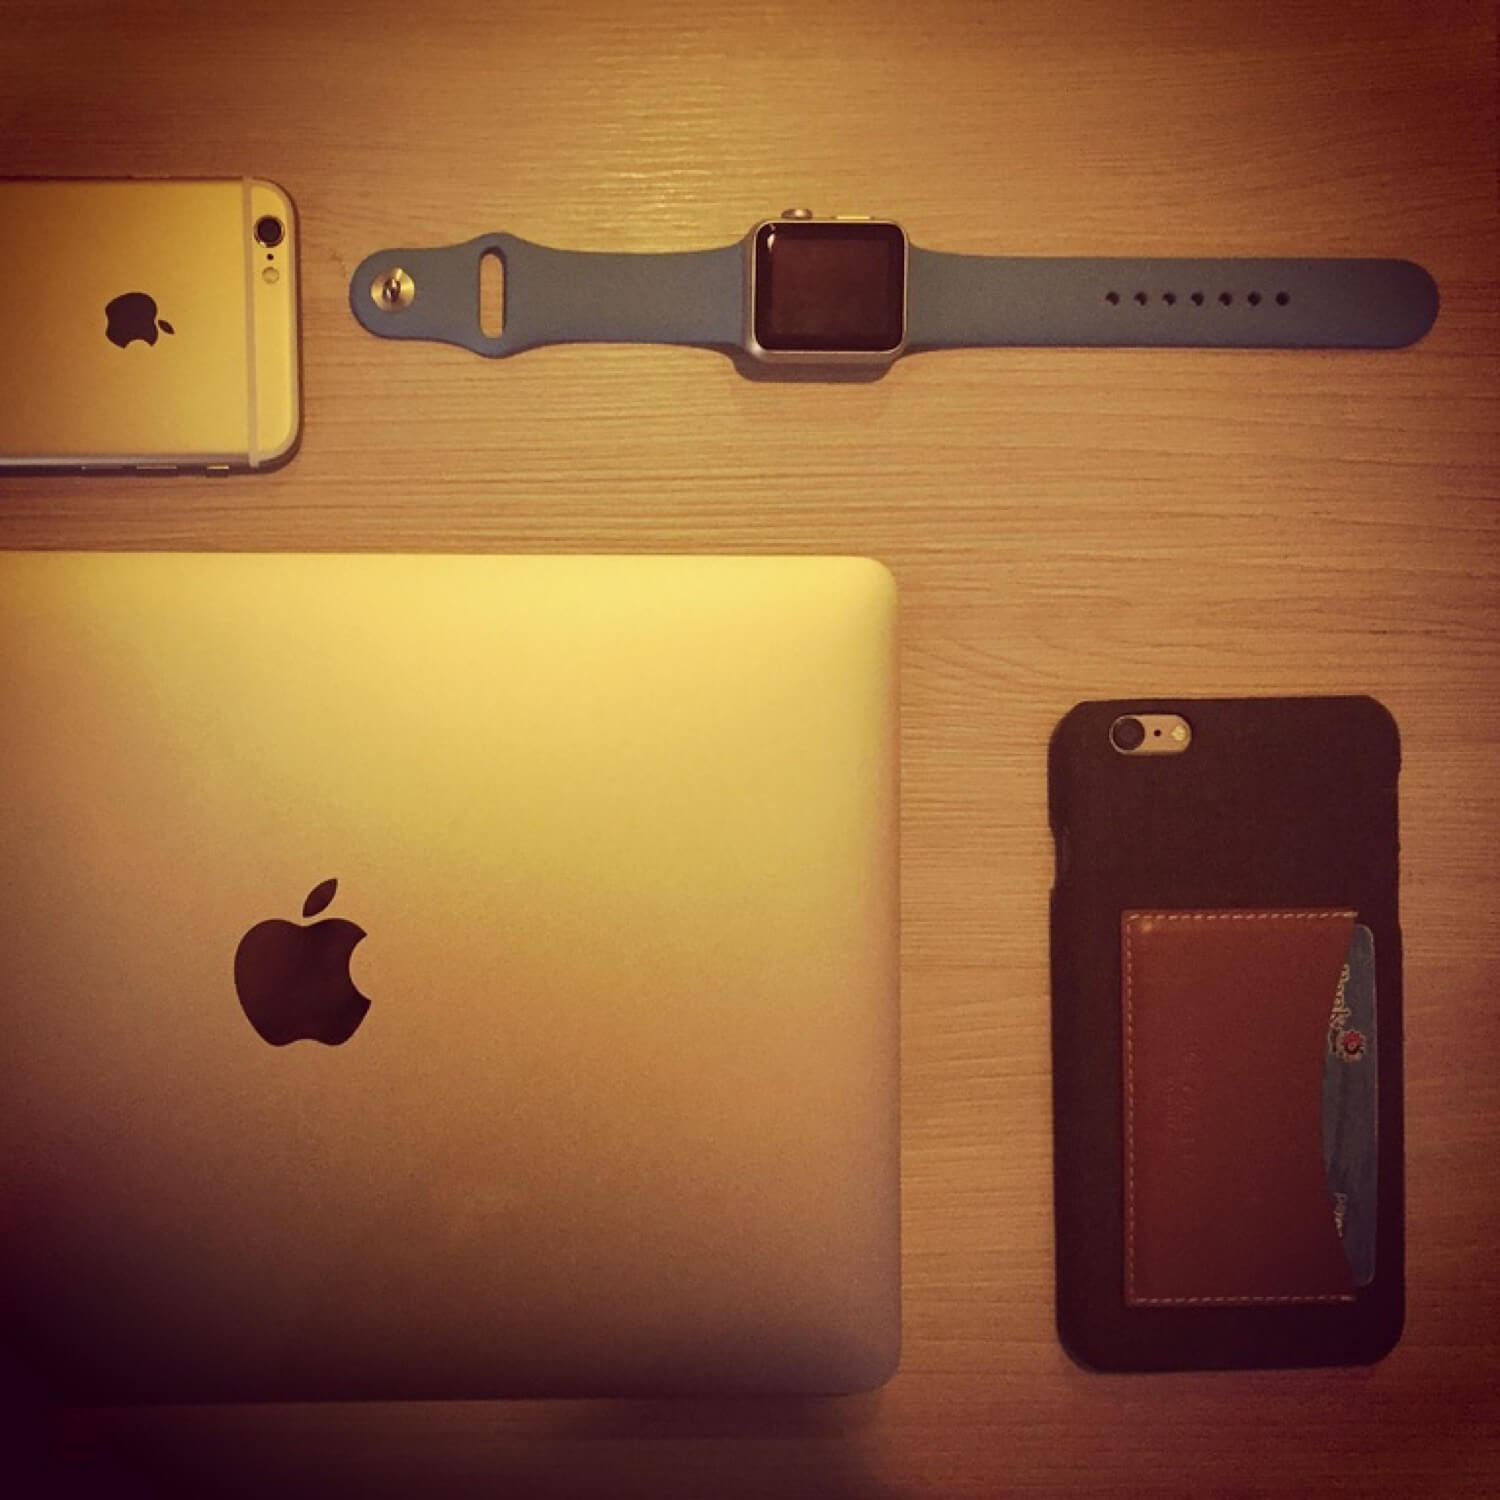 The Podcast #2 - Two Apple Watches that don’t belong to us